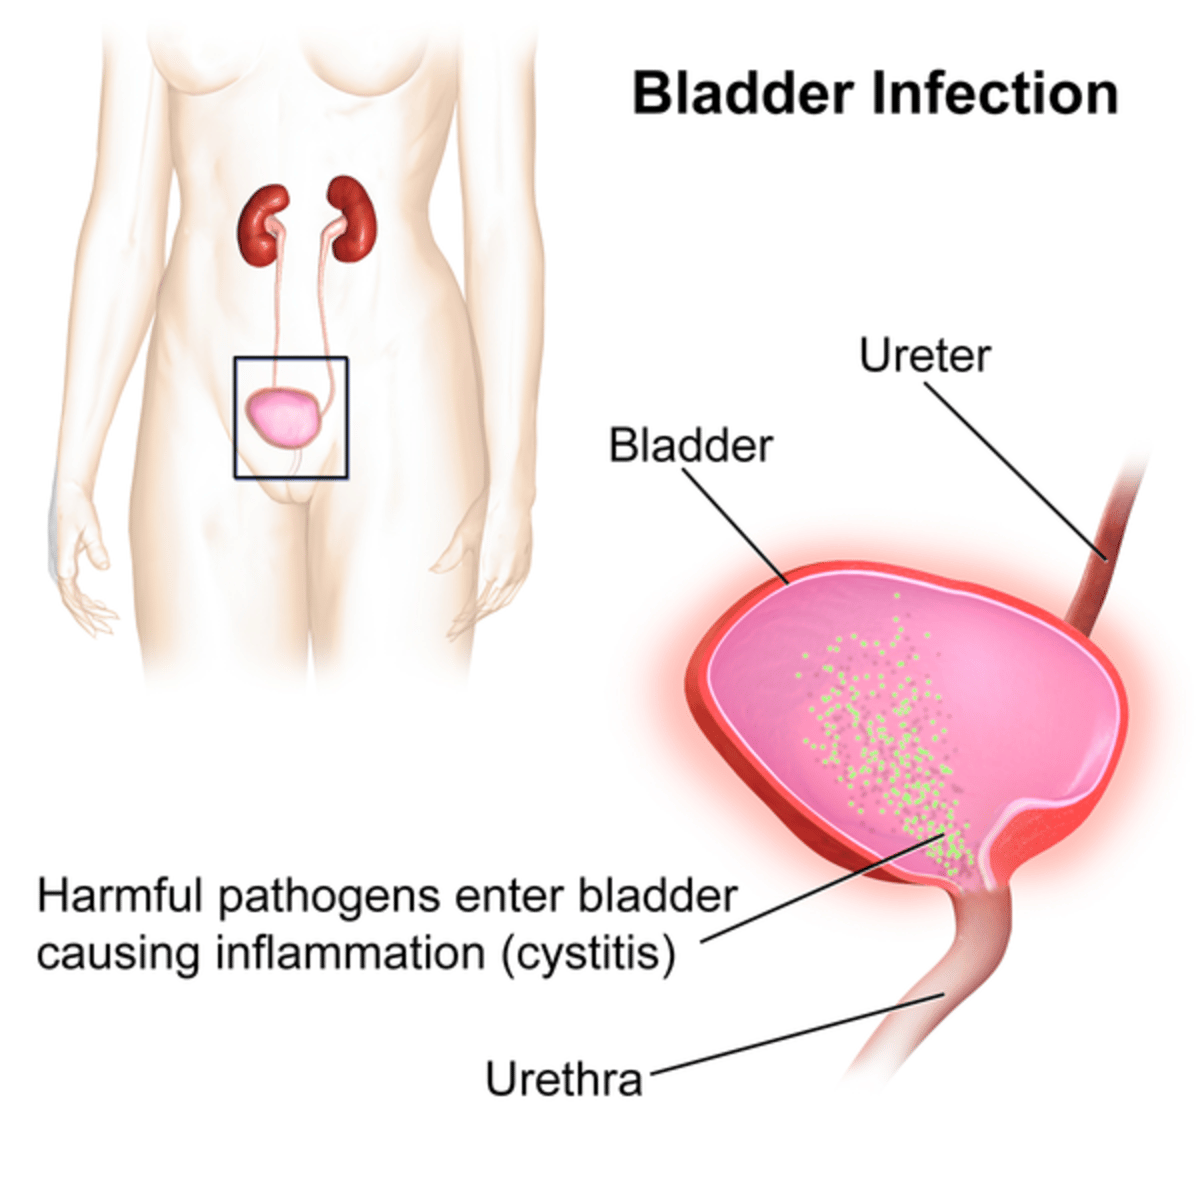 Daily Habits to Prevent Urinary Tract Infections